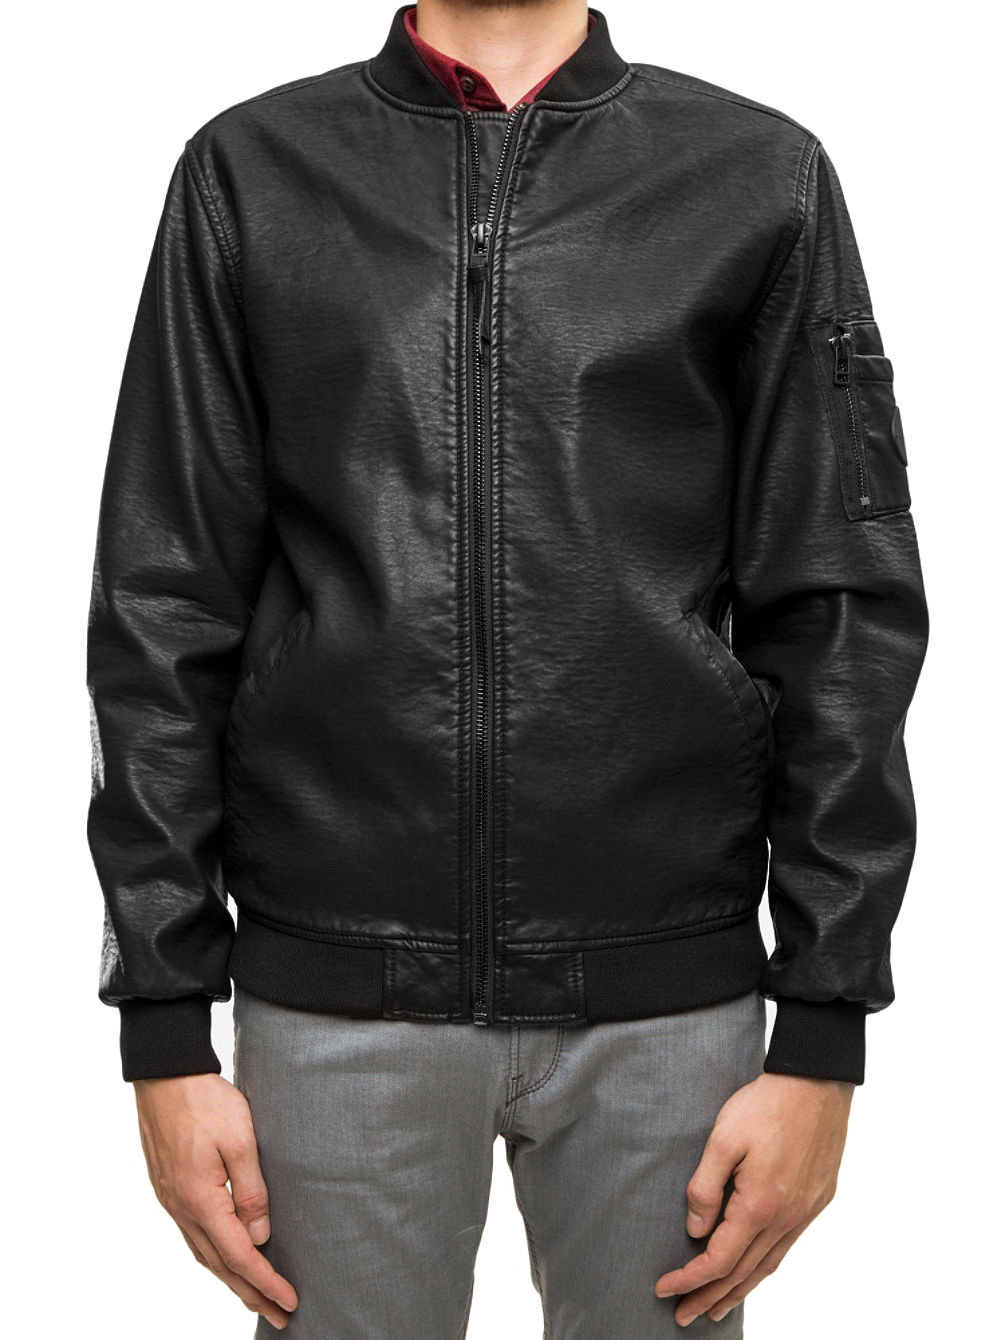 Artificial Leather Bomber Giacca